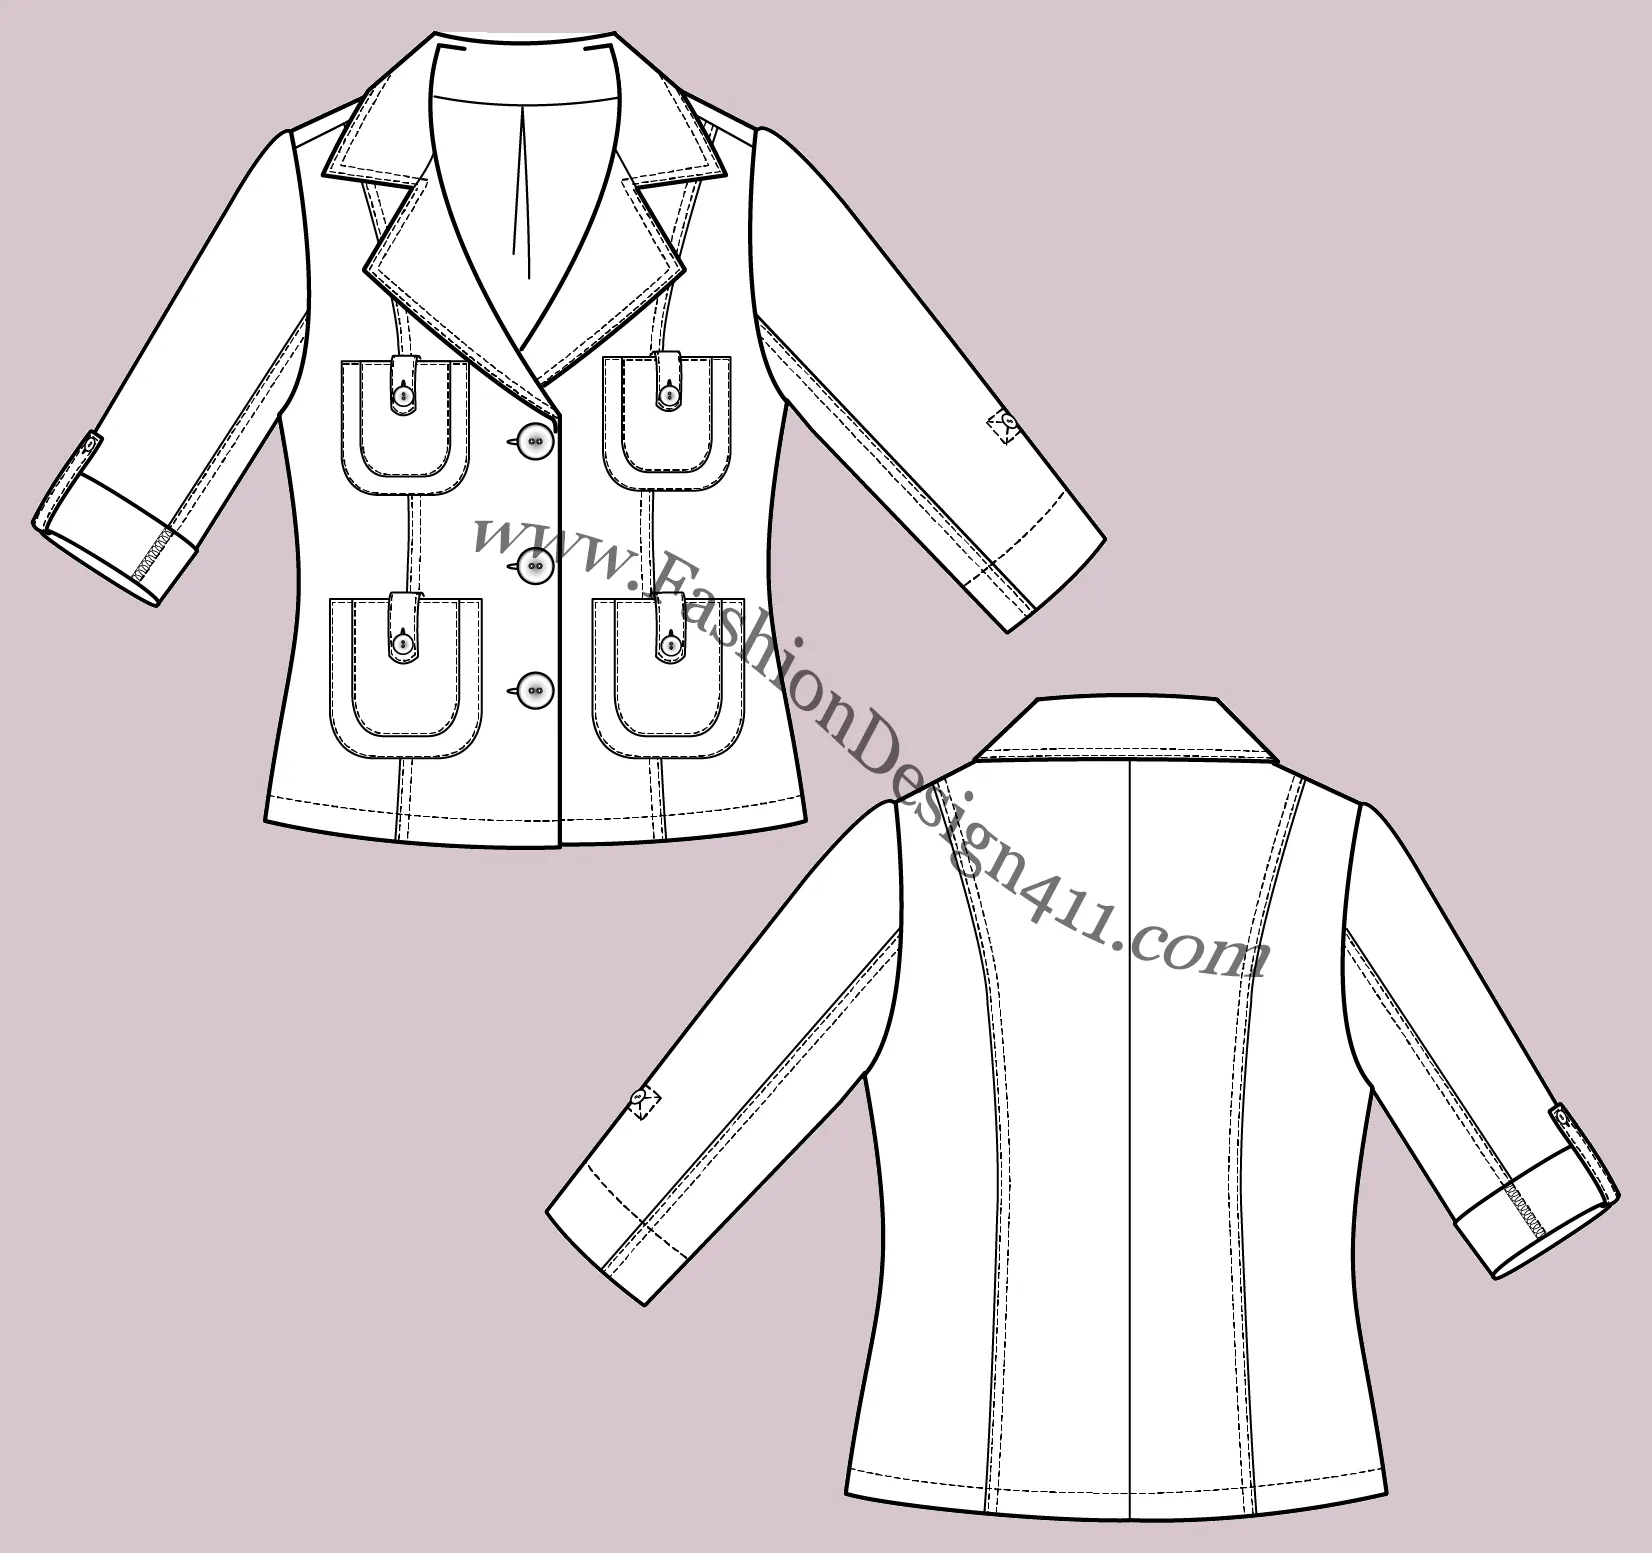 032 fashion flat sketch of a women's, rolled up, 3/4 sleeves fitted blazer with round corners patch pockets